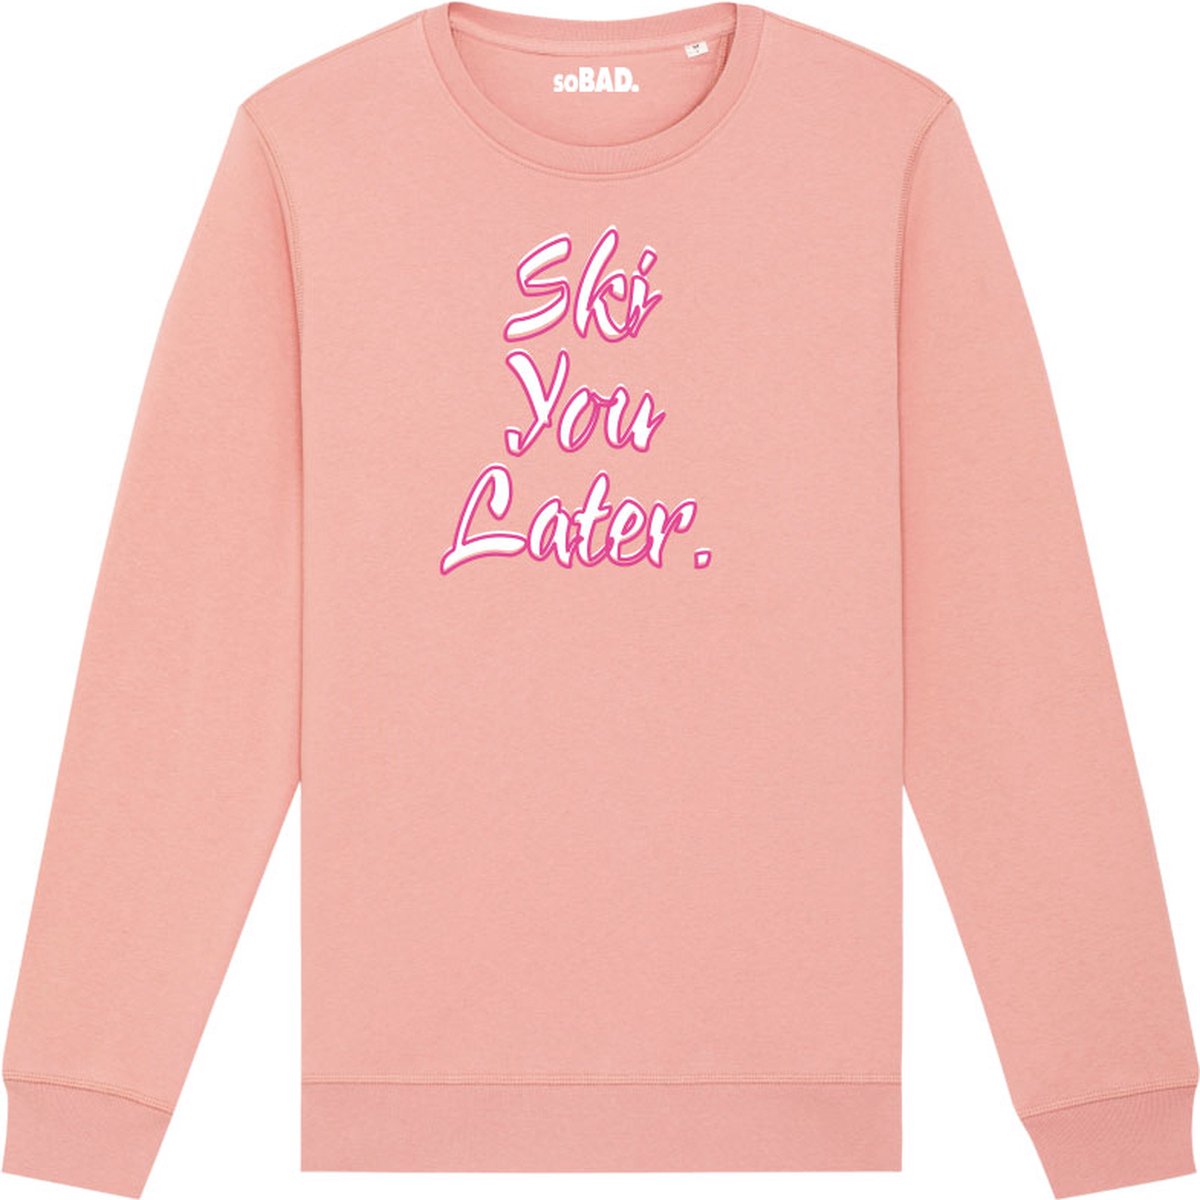 Wintersport sweater canyon pink S - Ski you later - soBAD. | Foute apres ski outfit | kleding | verkleedkleren | wintersporttruien | wintersport dames en heren